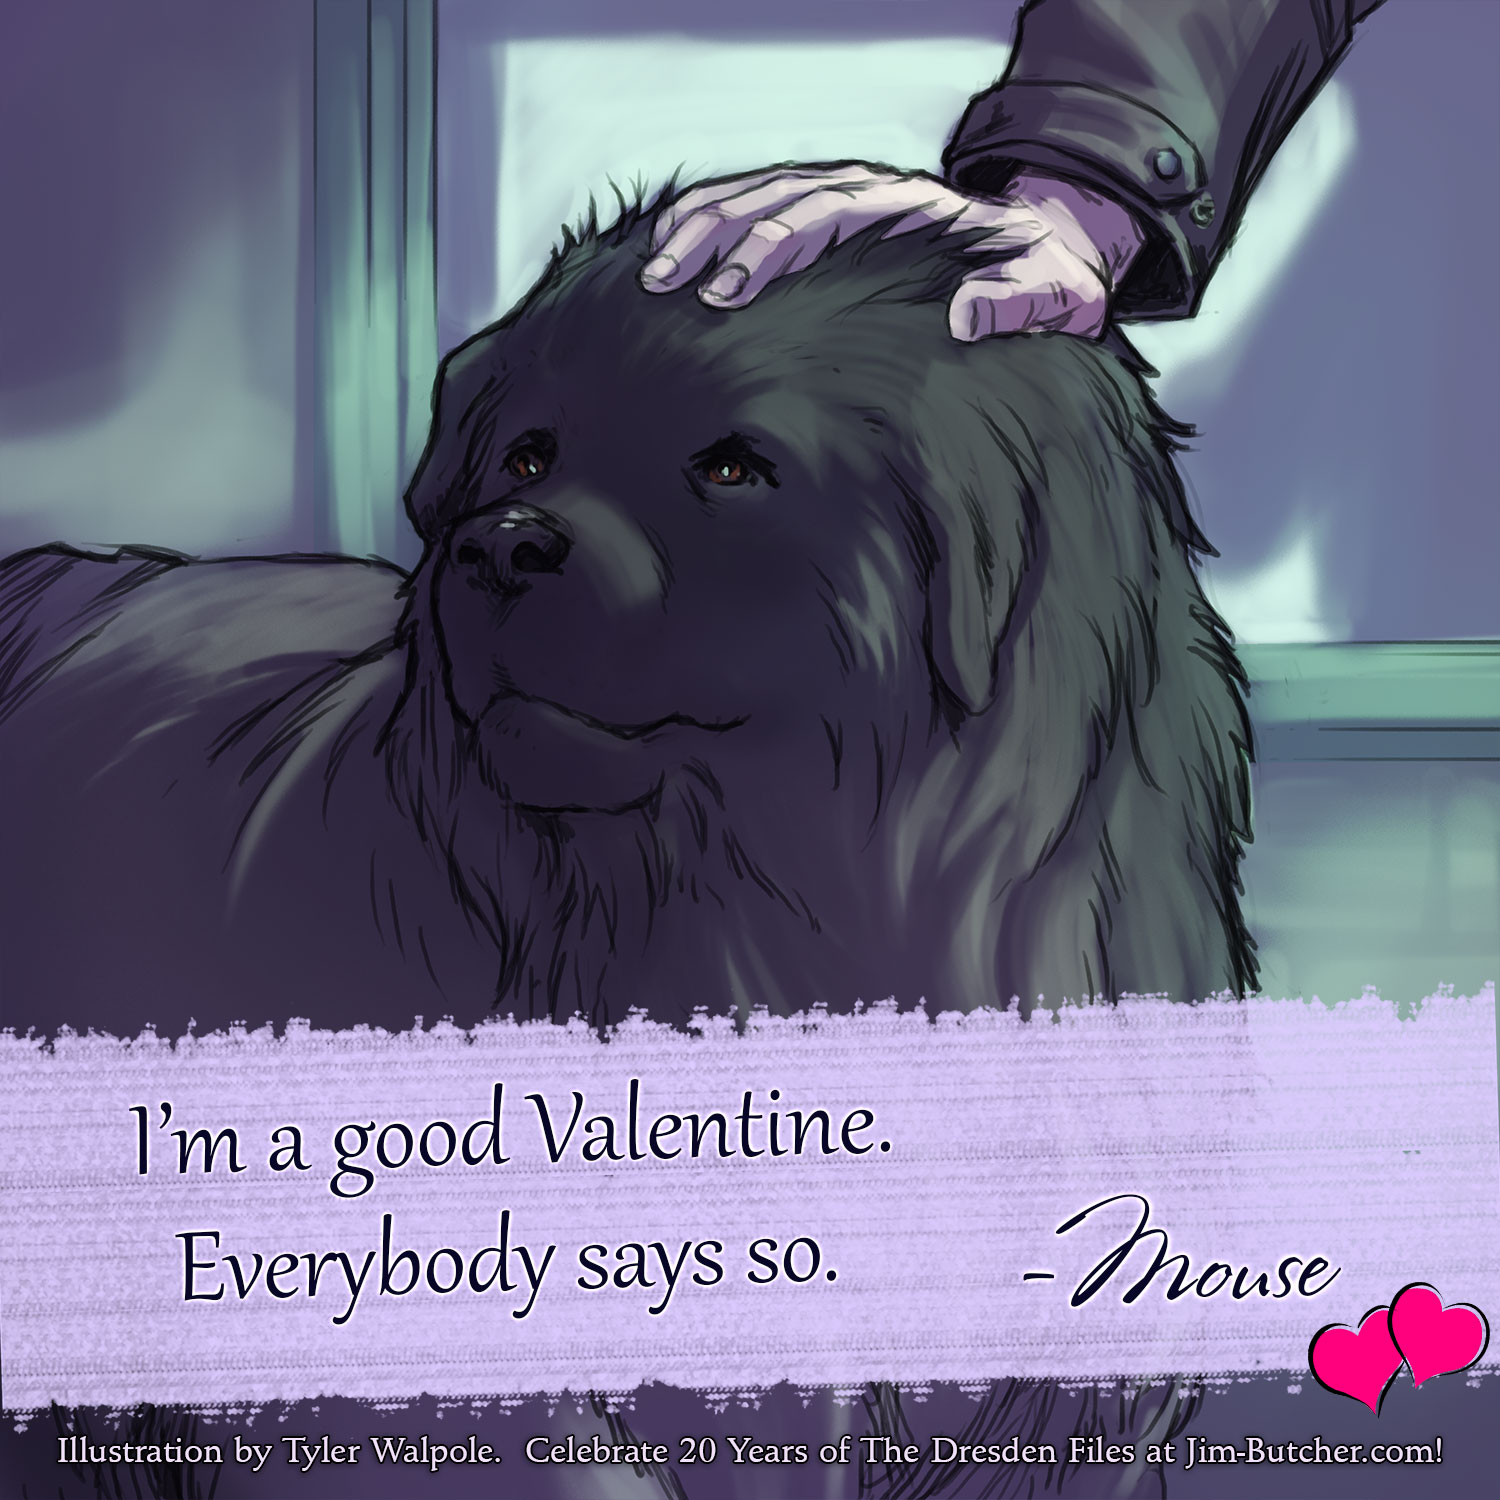 Mouse: I'm a good Valentine. Everybody says so.